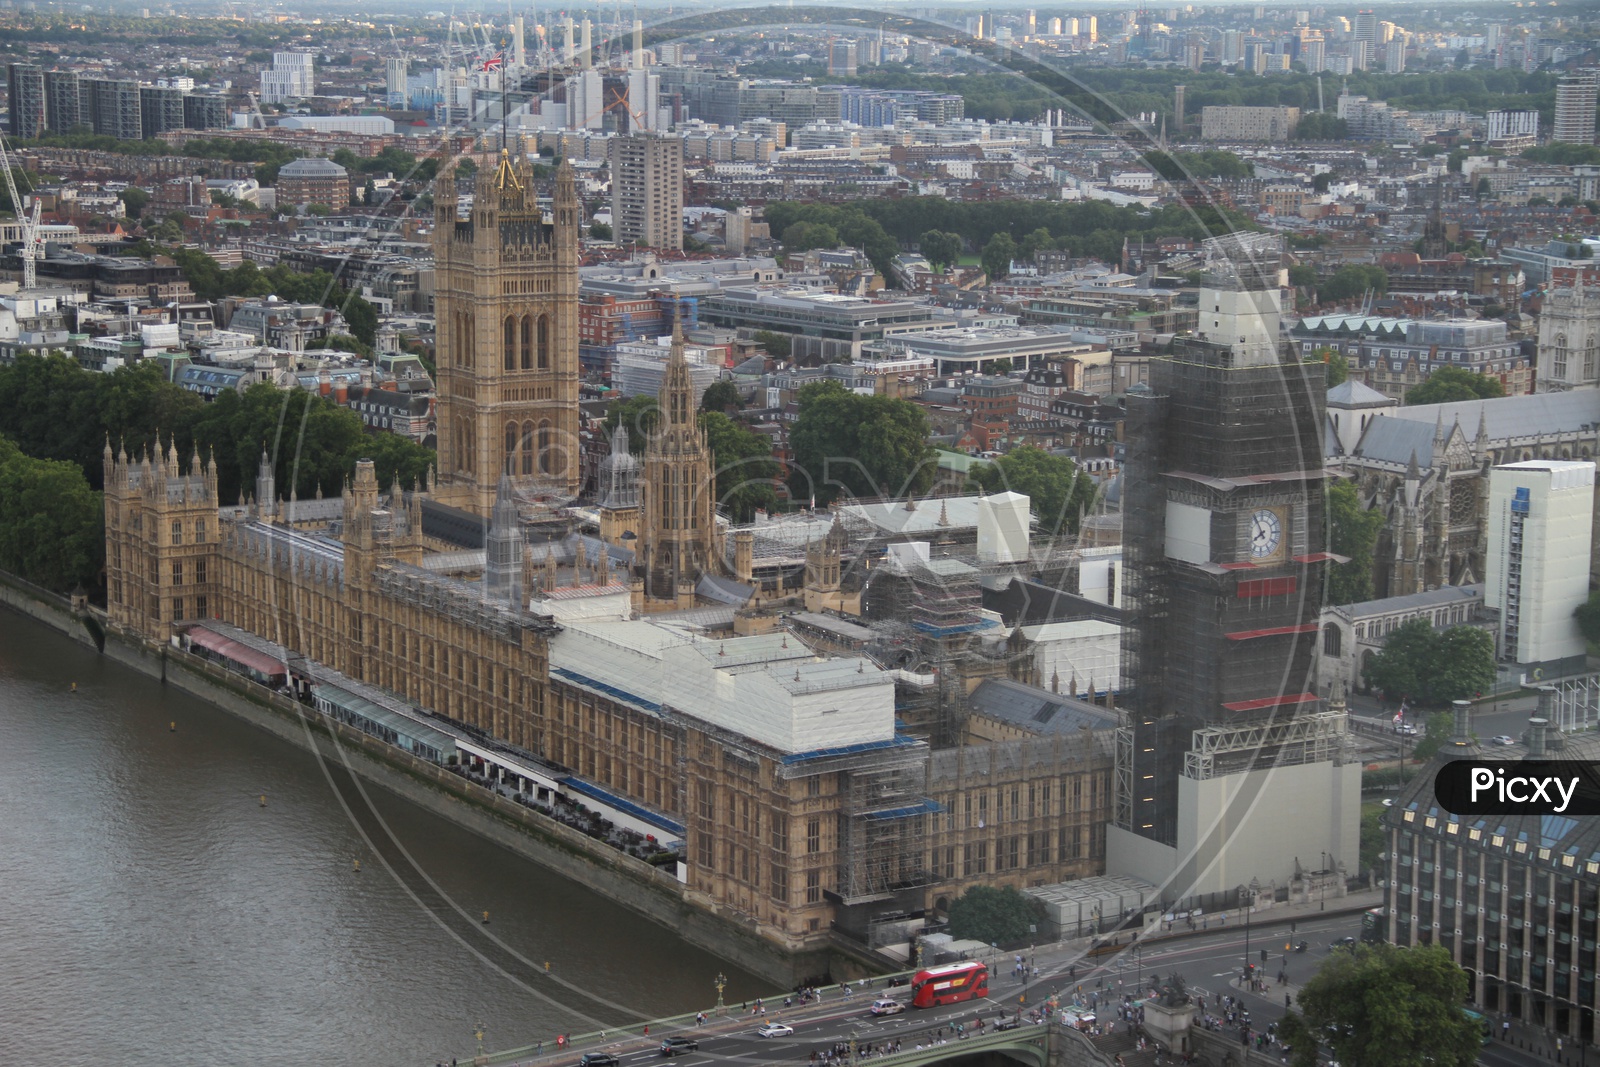 Palace of Westminster with Big Ben Clock Tower under Construction